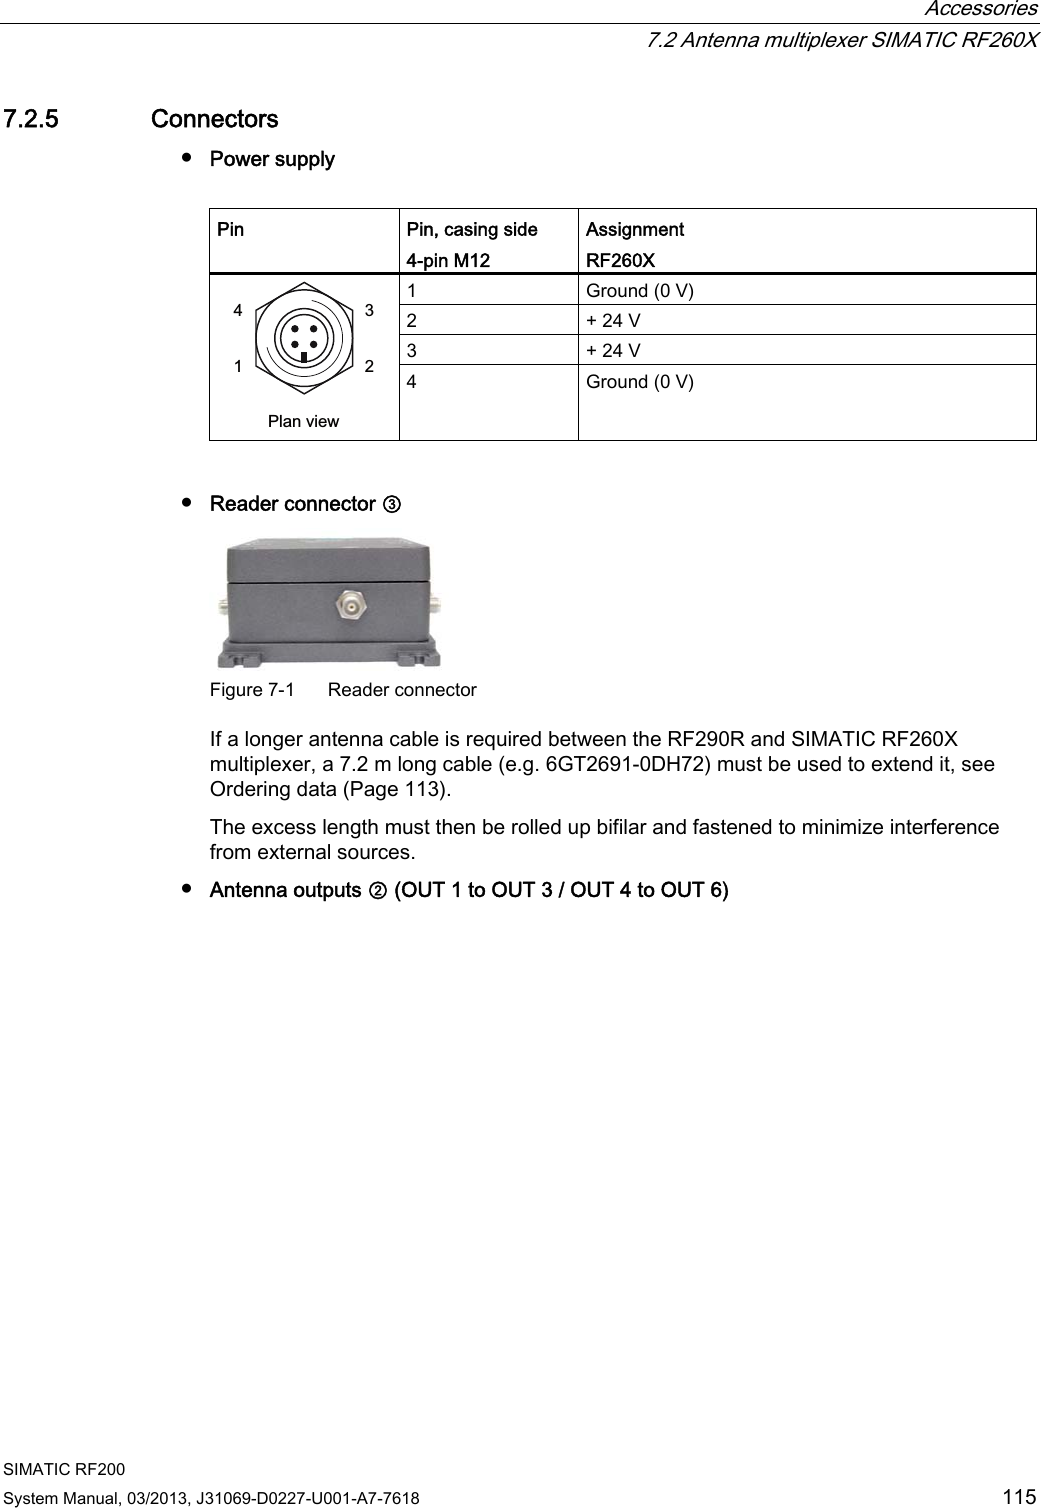  Accessories   7.2 Antenna multiplexer SIMATIC RF260X SIMATIC RF200 System Manual, 03/2013, J31069-D0227-U001-A7-7618  115 7.2.5 Connectors ● Power supply  Pin  Pin, casing side 4-pin M12 Assignment RF260X 1  Ground (0 V) 2  + 24 V 3  + 24 V 3ODQYLHZ 4  Ground (0 V)  ● Reader connector ③  Figure 7-1  Reader connector If a longer antenna cable is required between the RF290R and SIMATIC RF260X multiplexer, a 7.2 m long cable (e.g. 6GT2691-0DH72) must be used to extend it, see Ordering data (Page 113).  The excess length must then be rolled up bifilar and fastened to minimize interference from external sources. ● Antenna outputs ② (OUT 1 to OUT 3 / OUT 4 to OUT 6) 